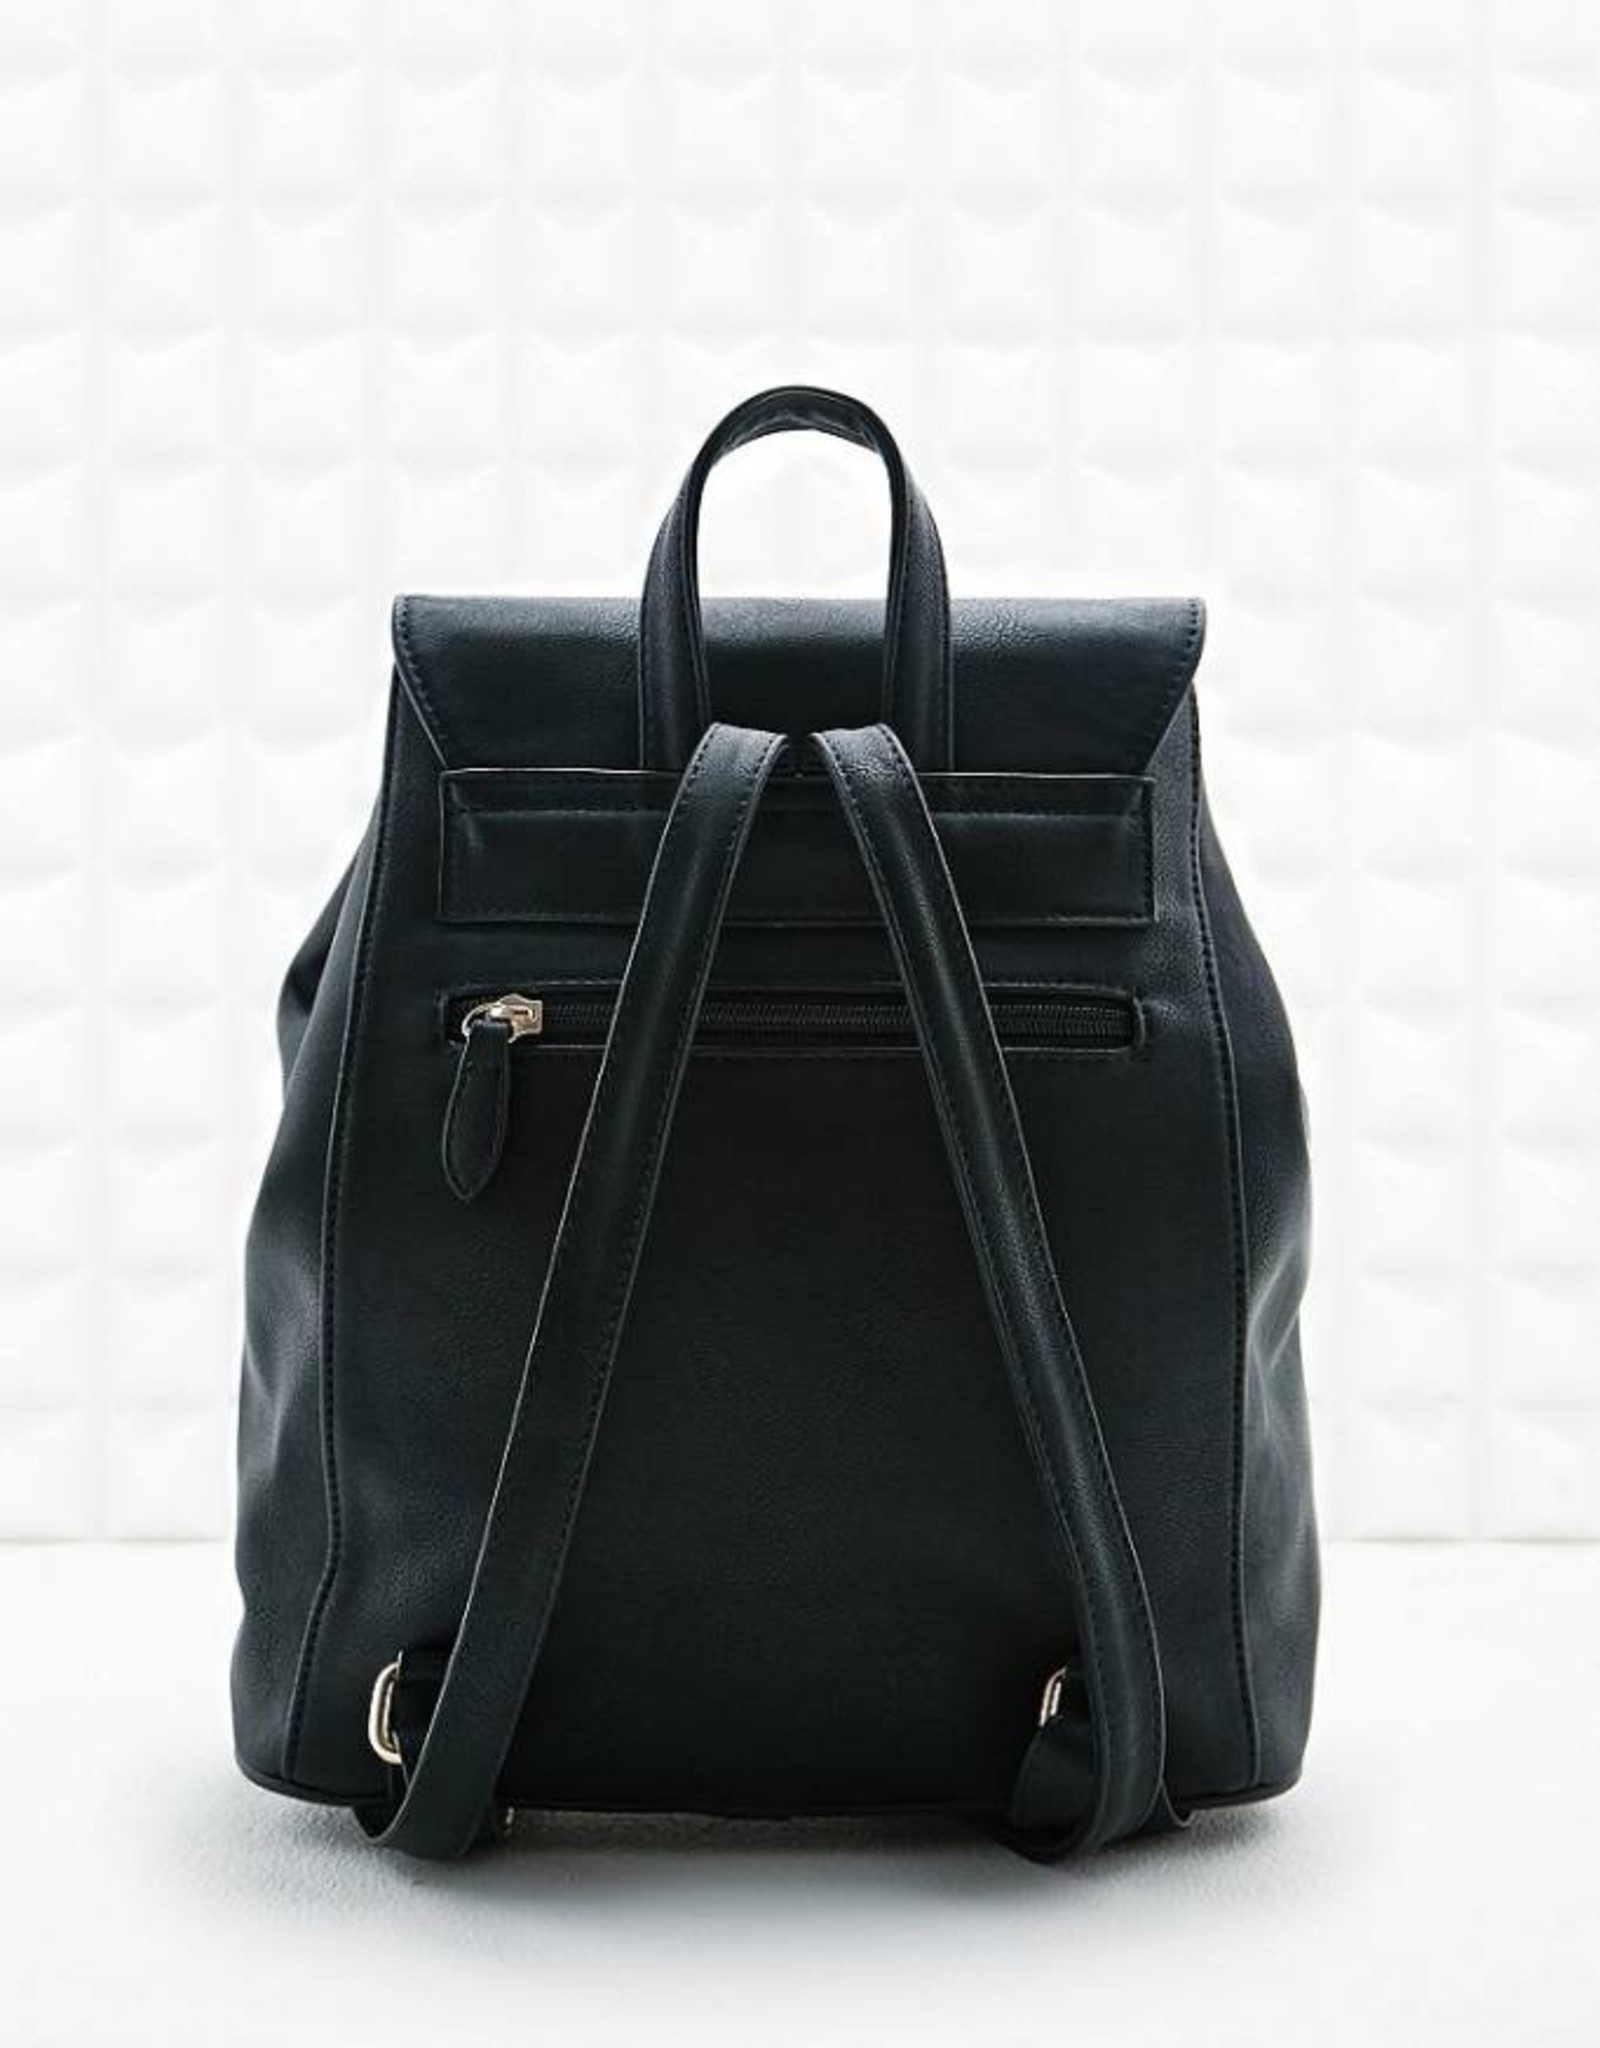 Brand 1 Small black backpack